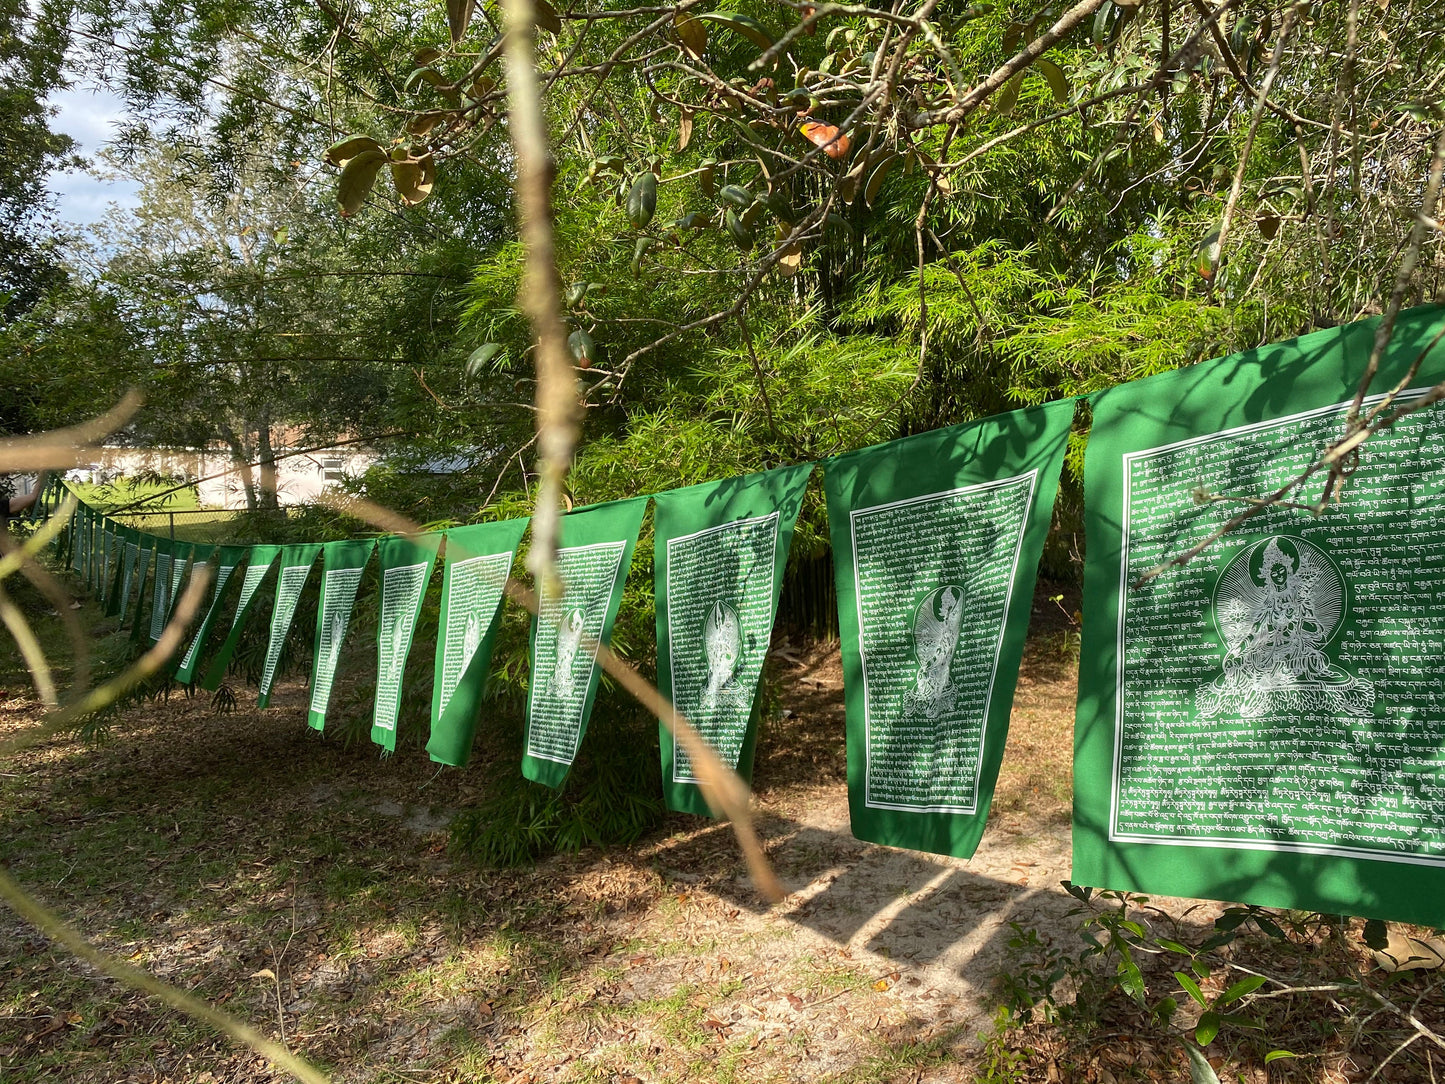 A series of high-quality Green Tara Tibetan prayer flags, with white ink on green cloth, each measuring 14x17 inches and hanging outdoors.